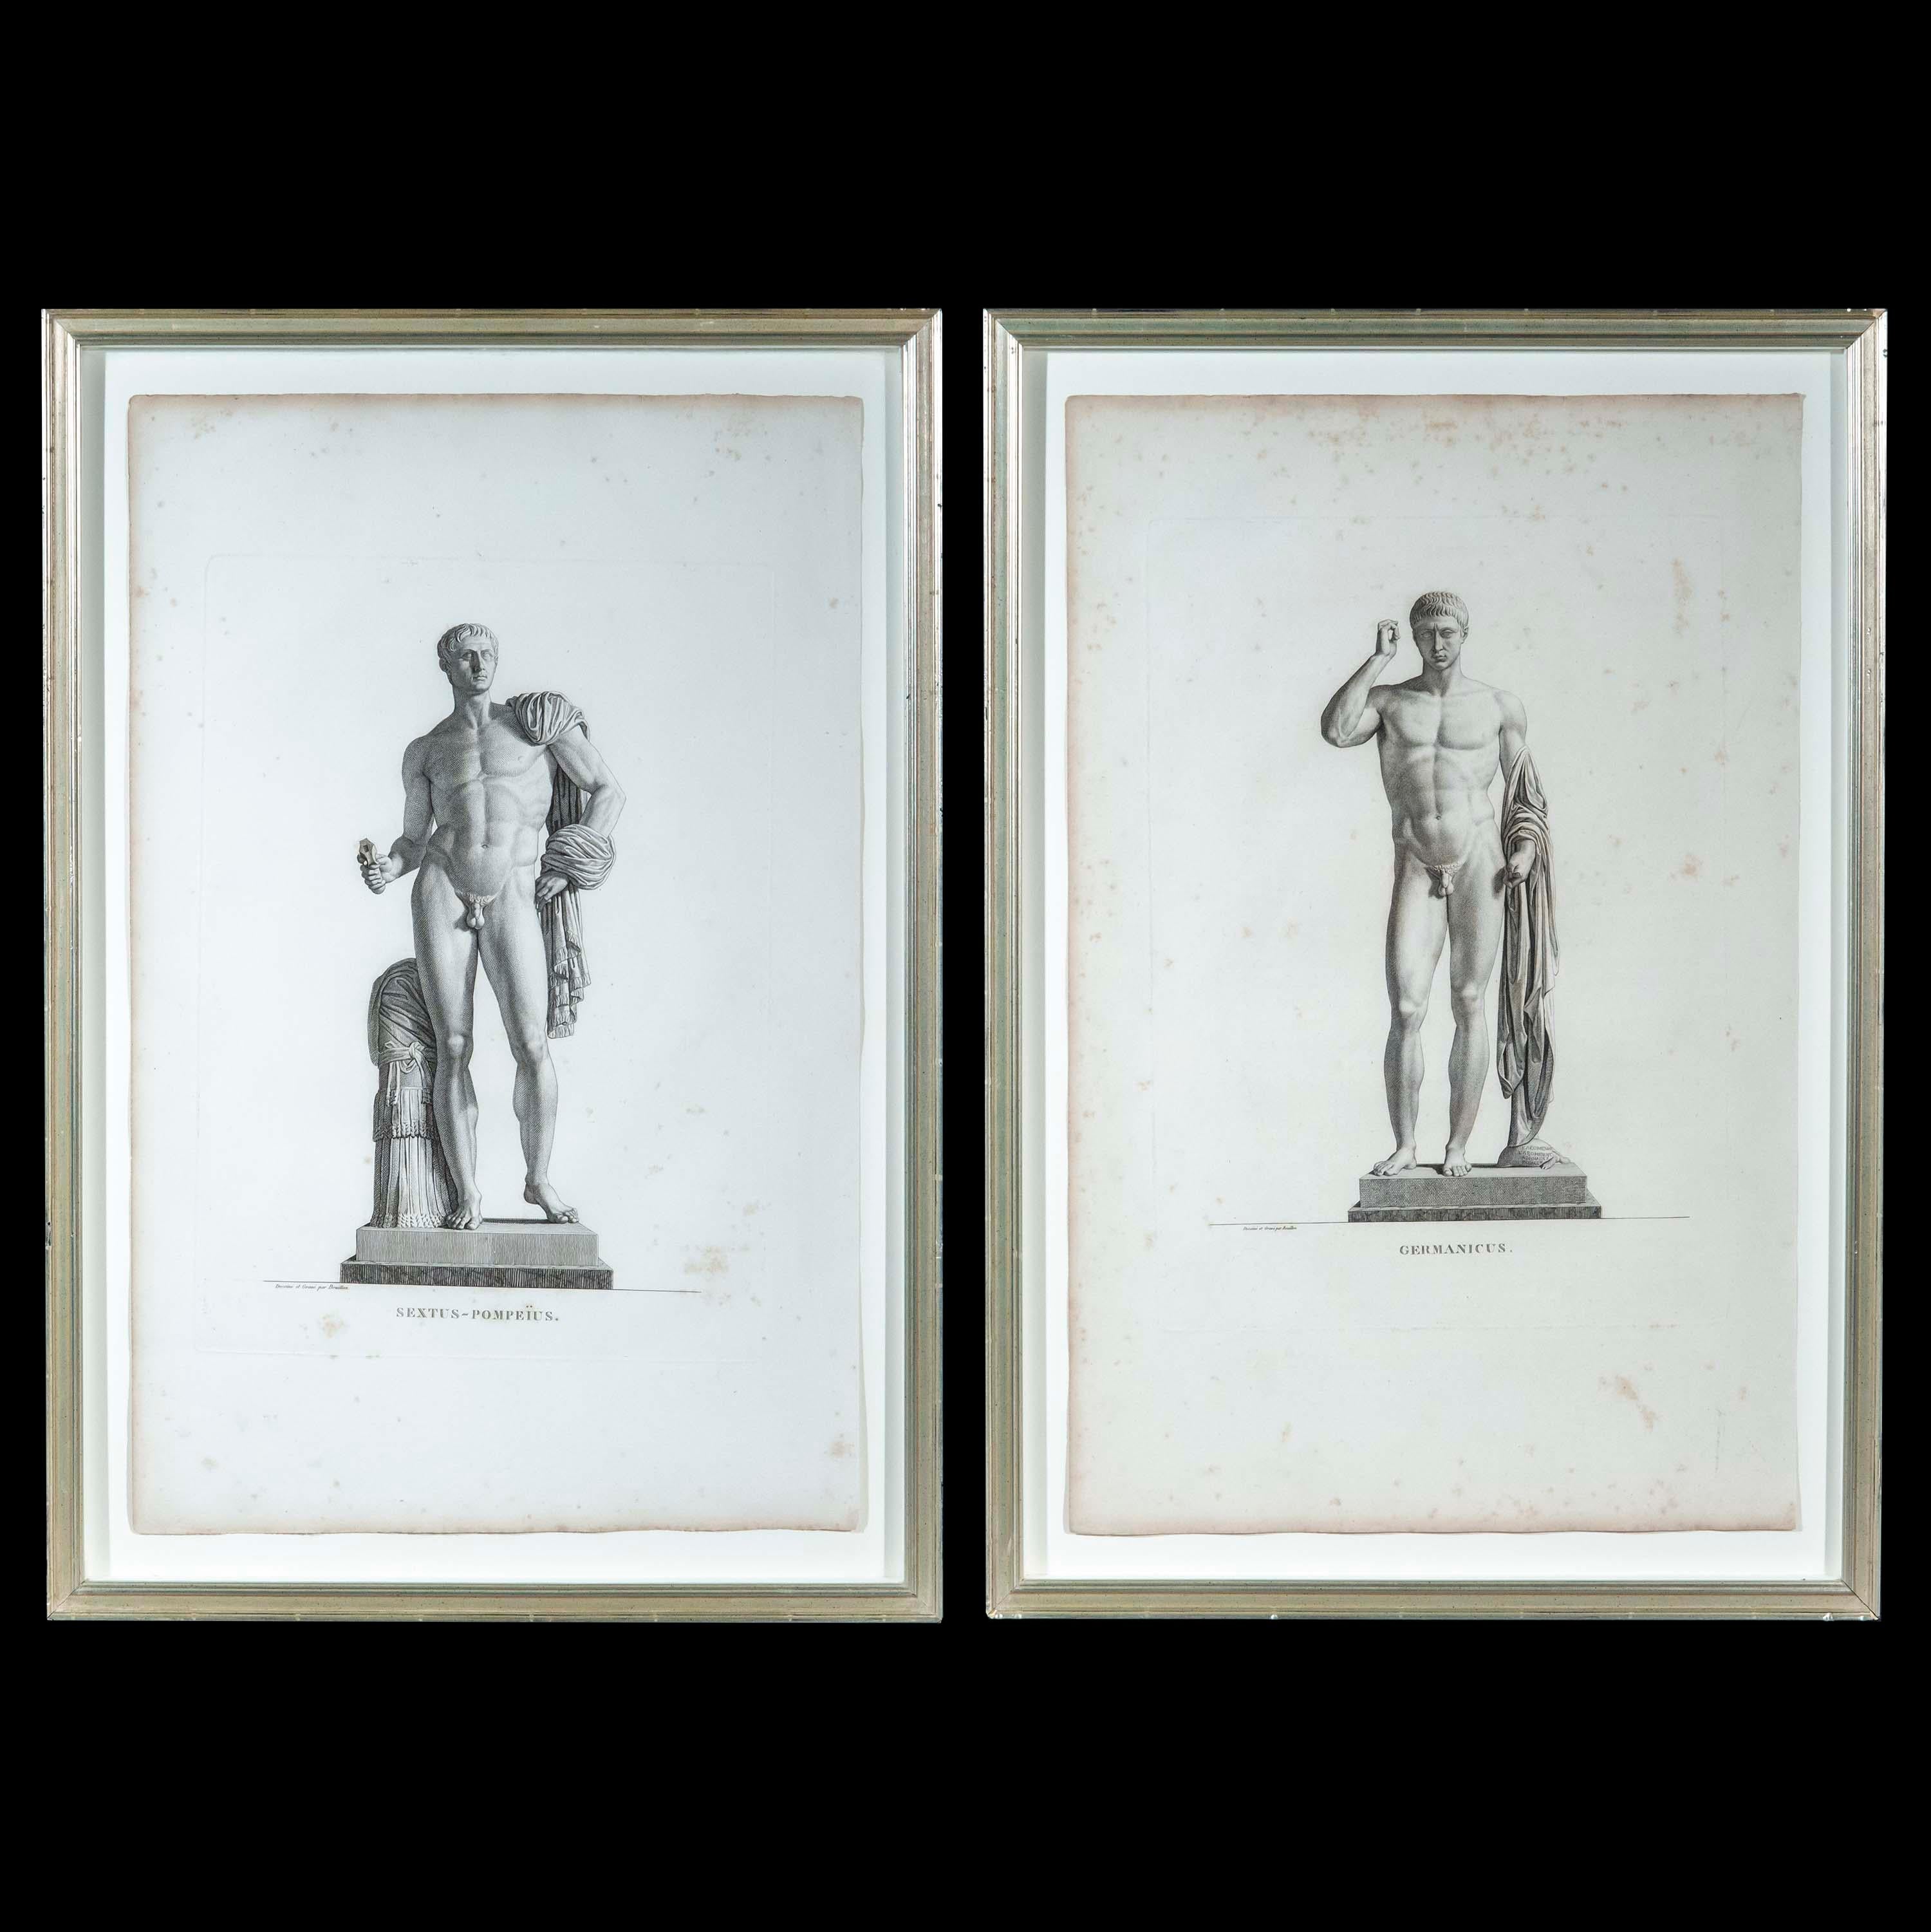 19th Century Grand Tour Engravings of Germanicus and Sextus-Pompeius by Pierre Bouillon For Sale